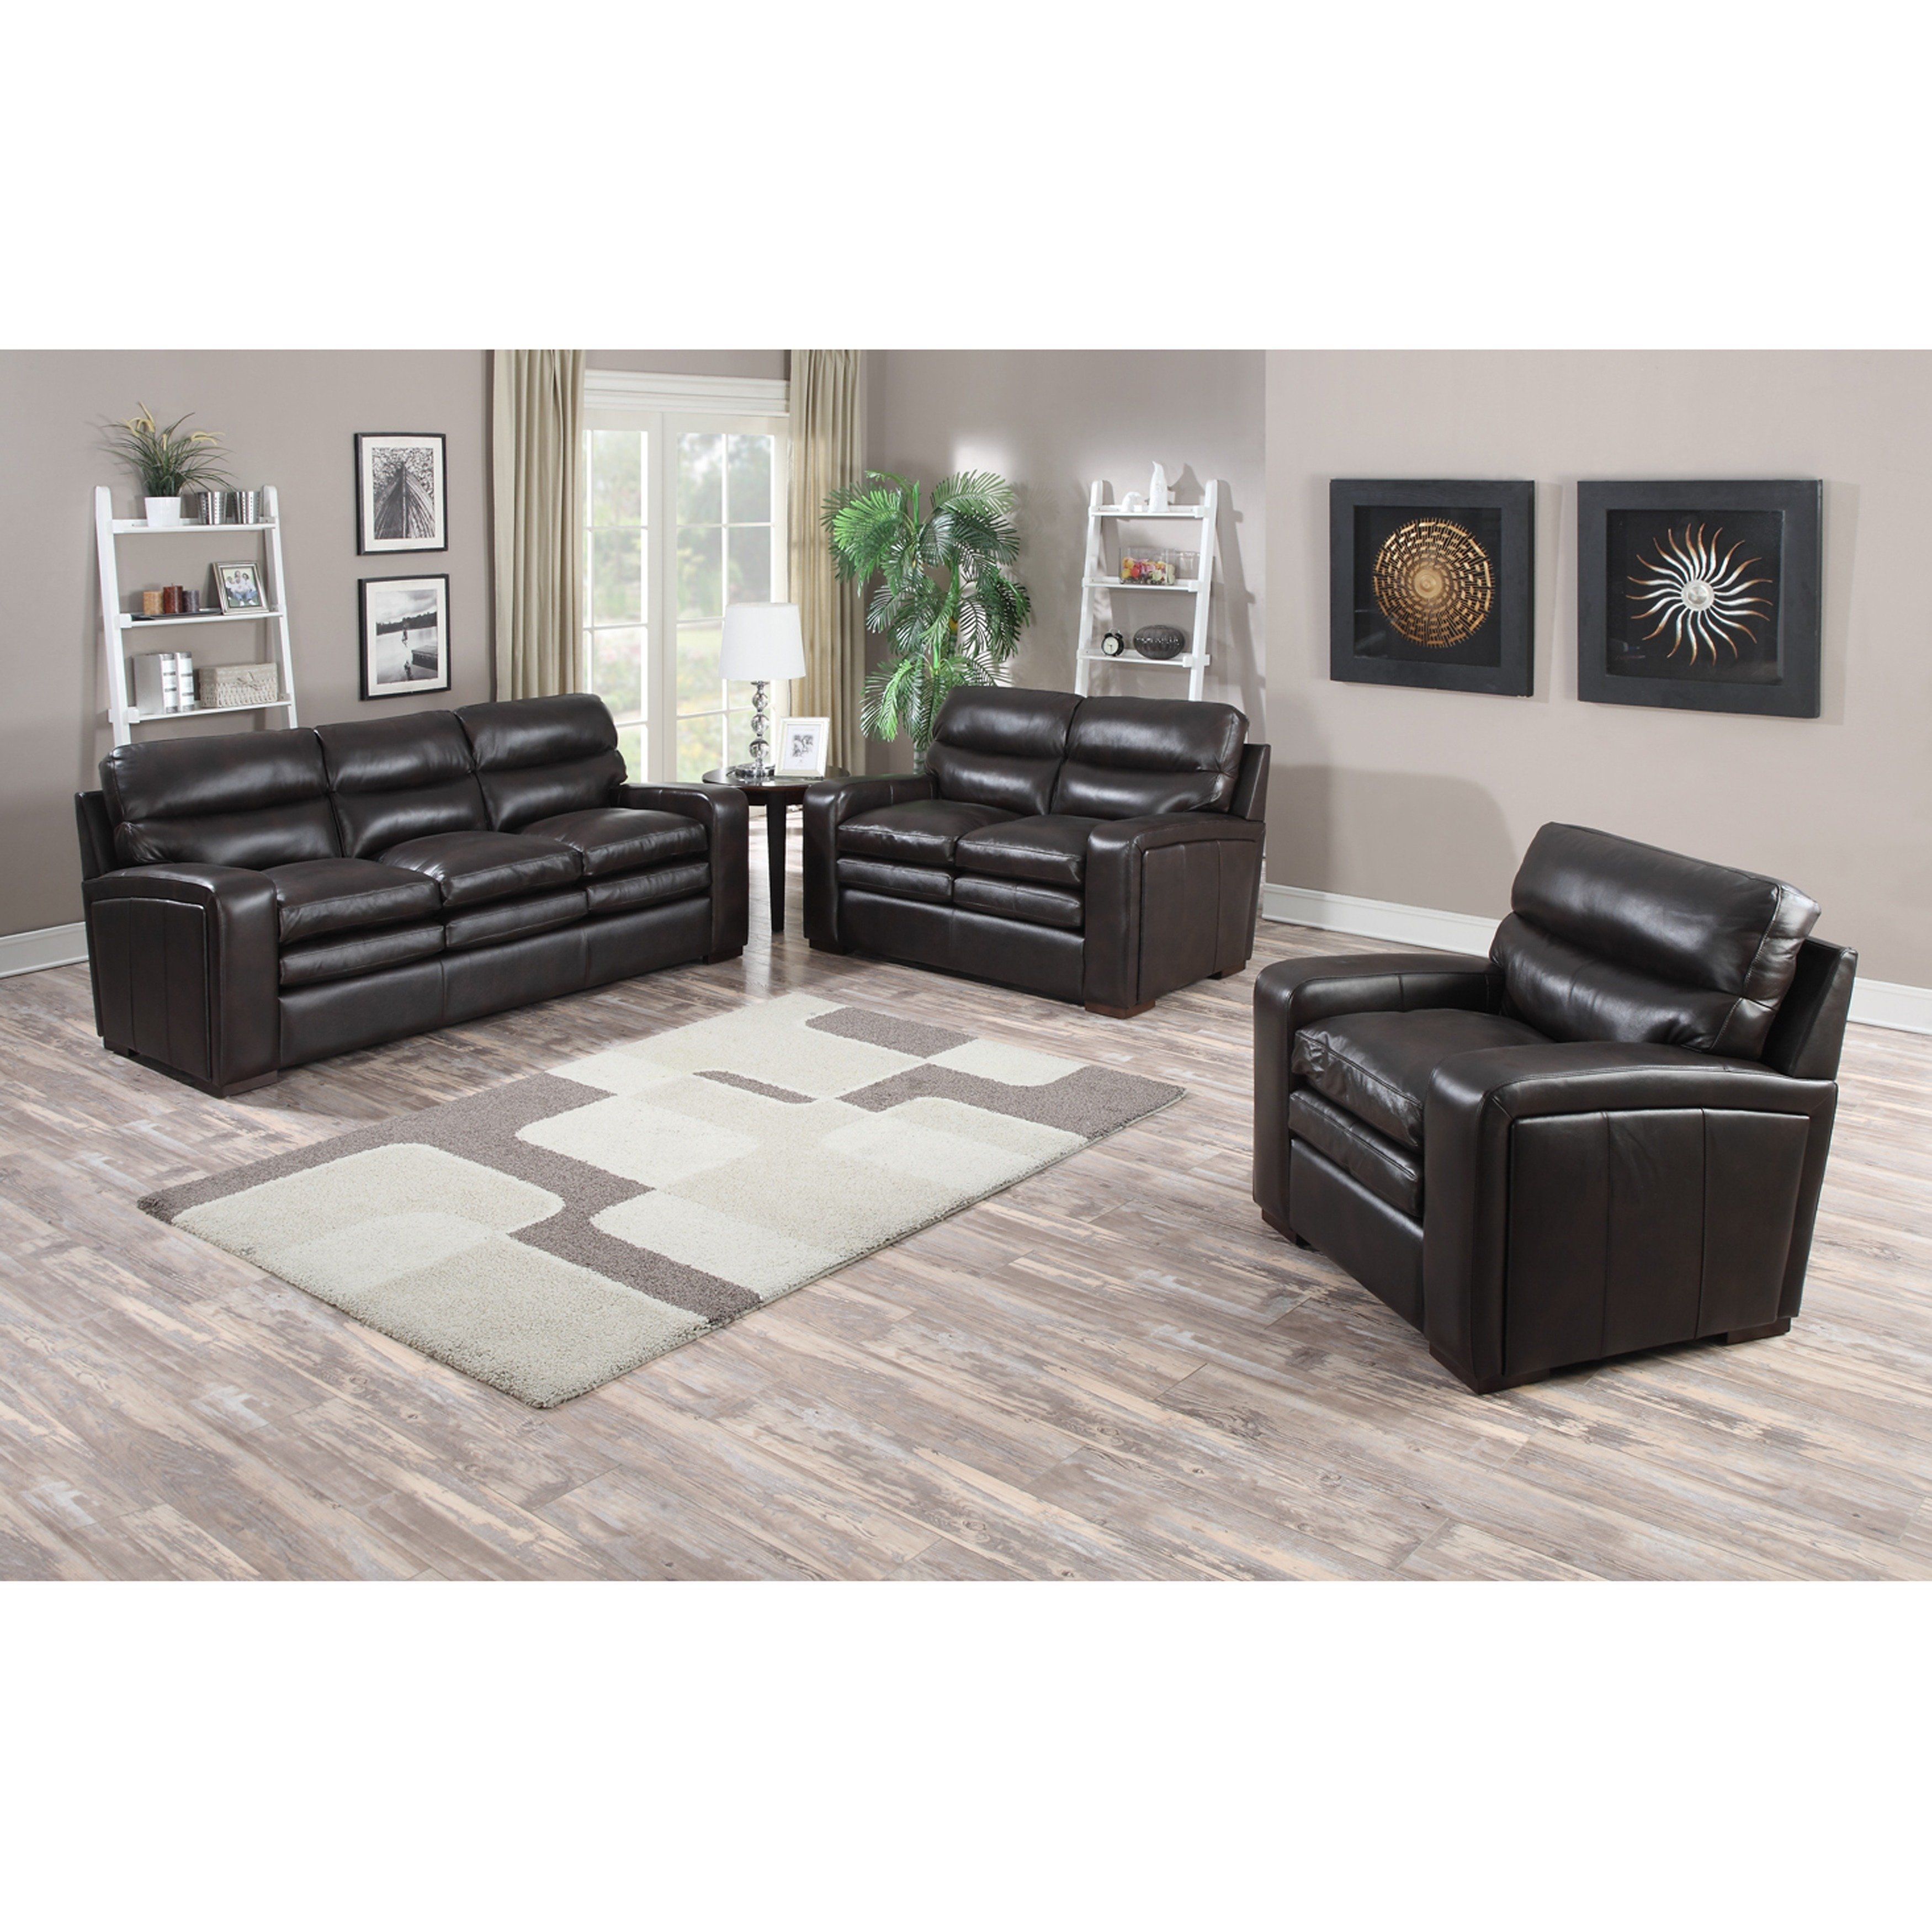 Shop Mercer Dark Brown Italian Leather Sofa, Loveseat And Chair With Regard To Mercer Foam Oversized Sofa Chairs (Photo 16 of 20)